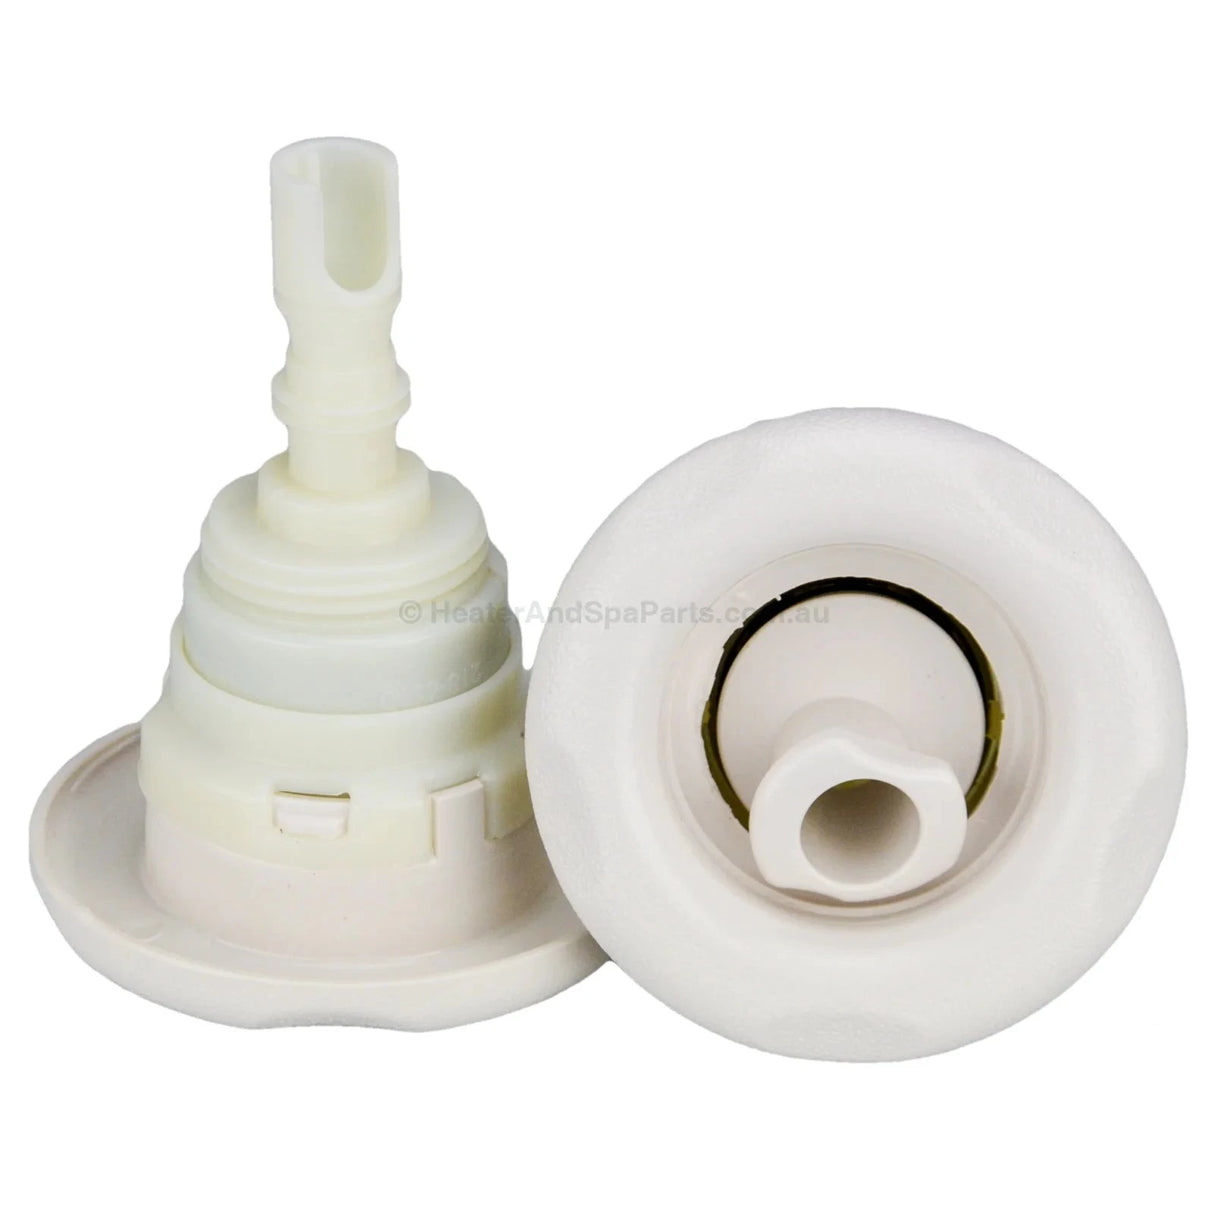 Waterway Poly Storm 5 Point Scallop - Roto - White - THREADED - 86mm - Heater and Spa Parts